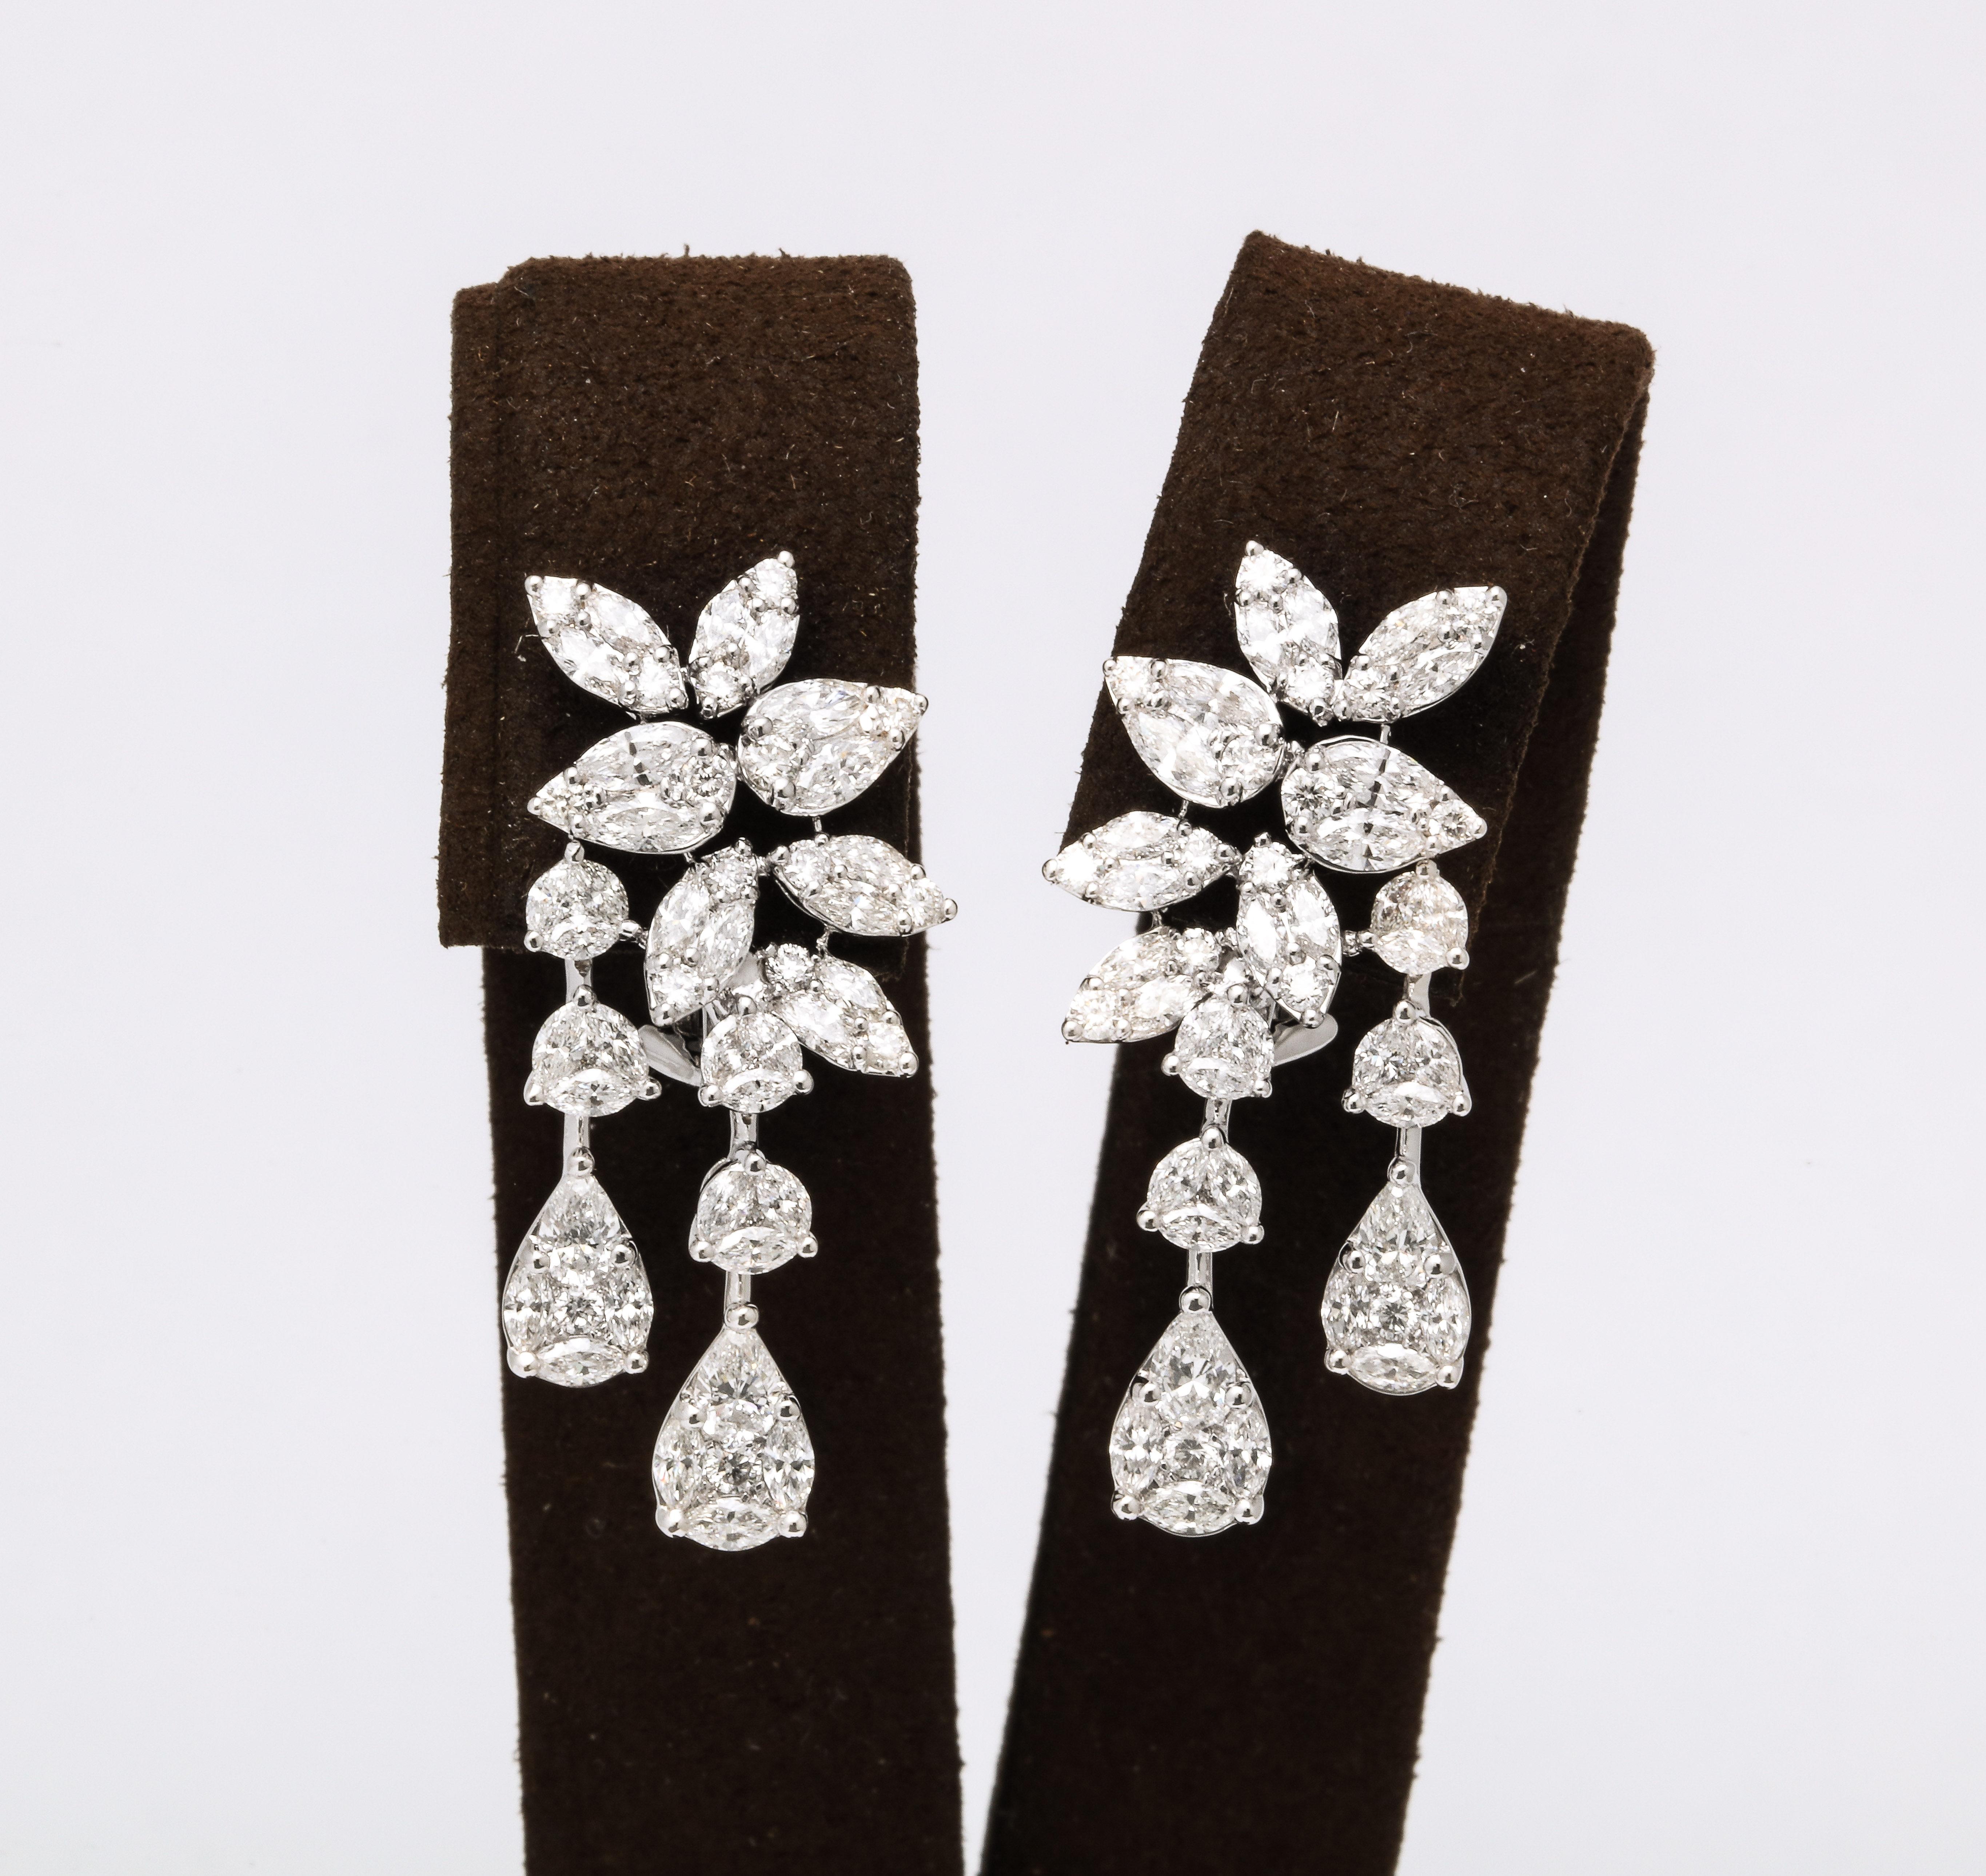 
A fabulous pair of illusion set diamond earrings. 

4.14 carats of multi-shape diamonds set in 18k white gold. 

1.25 inches from the highest to lowest points, over half an inch wide. 

An impeccable design! 